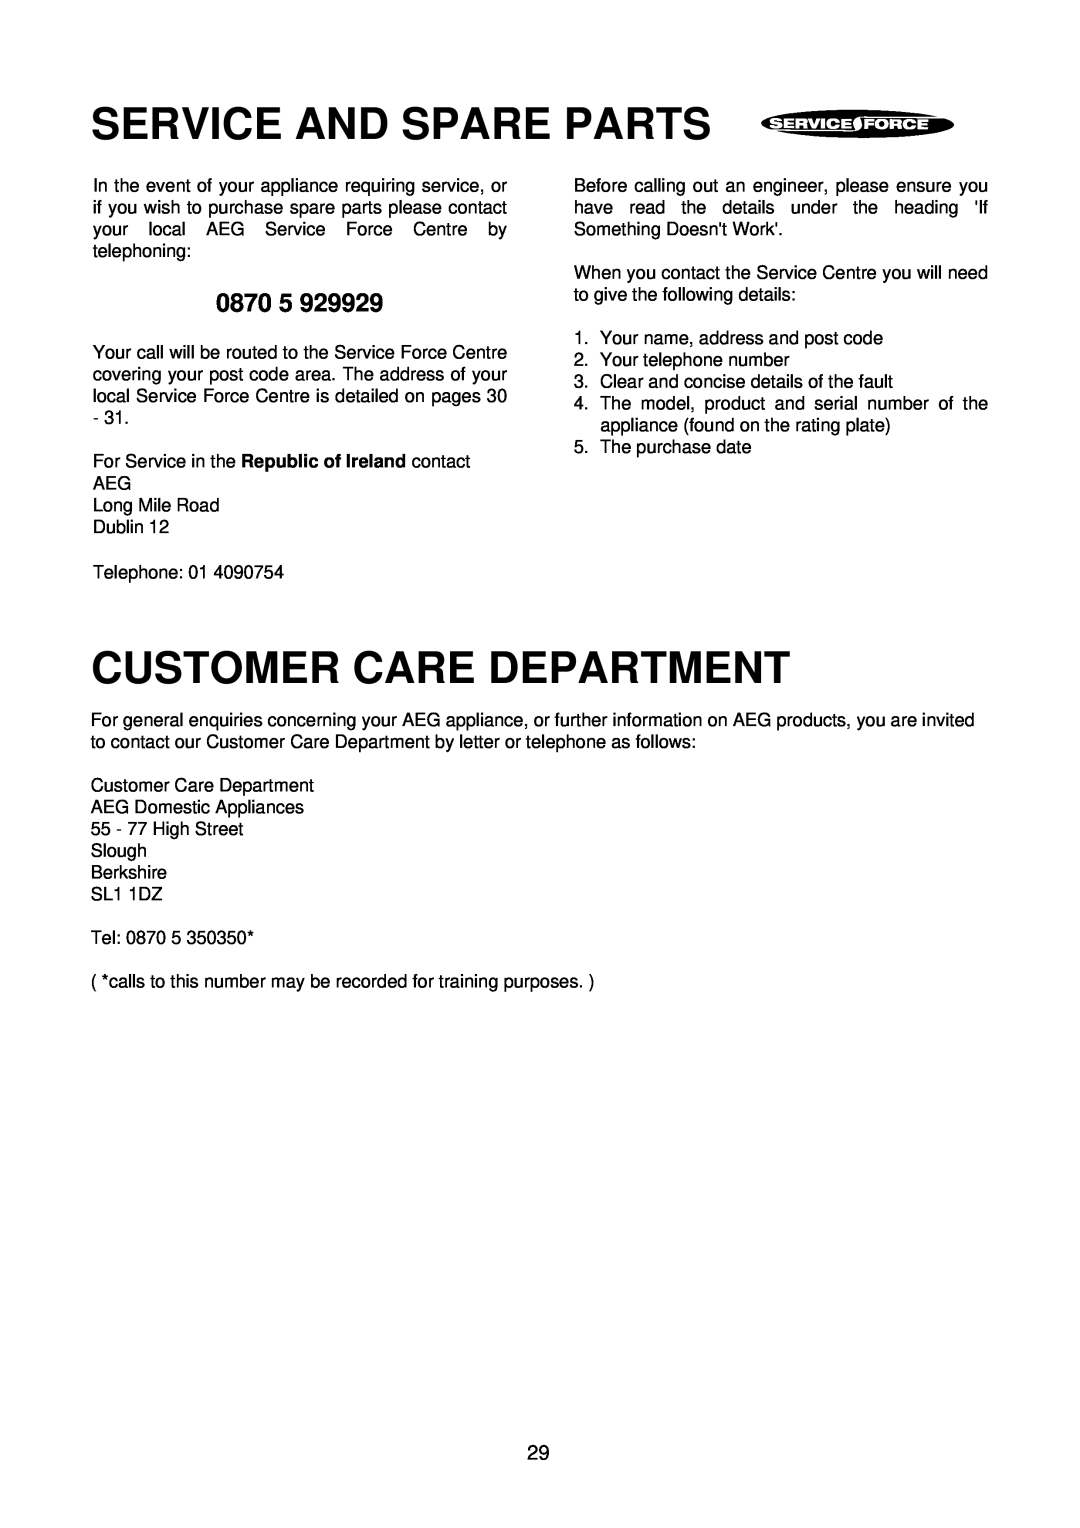 Electrolux D2160 installation instructions Service And Spare Parts, Customer Care Department, 0870 5 